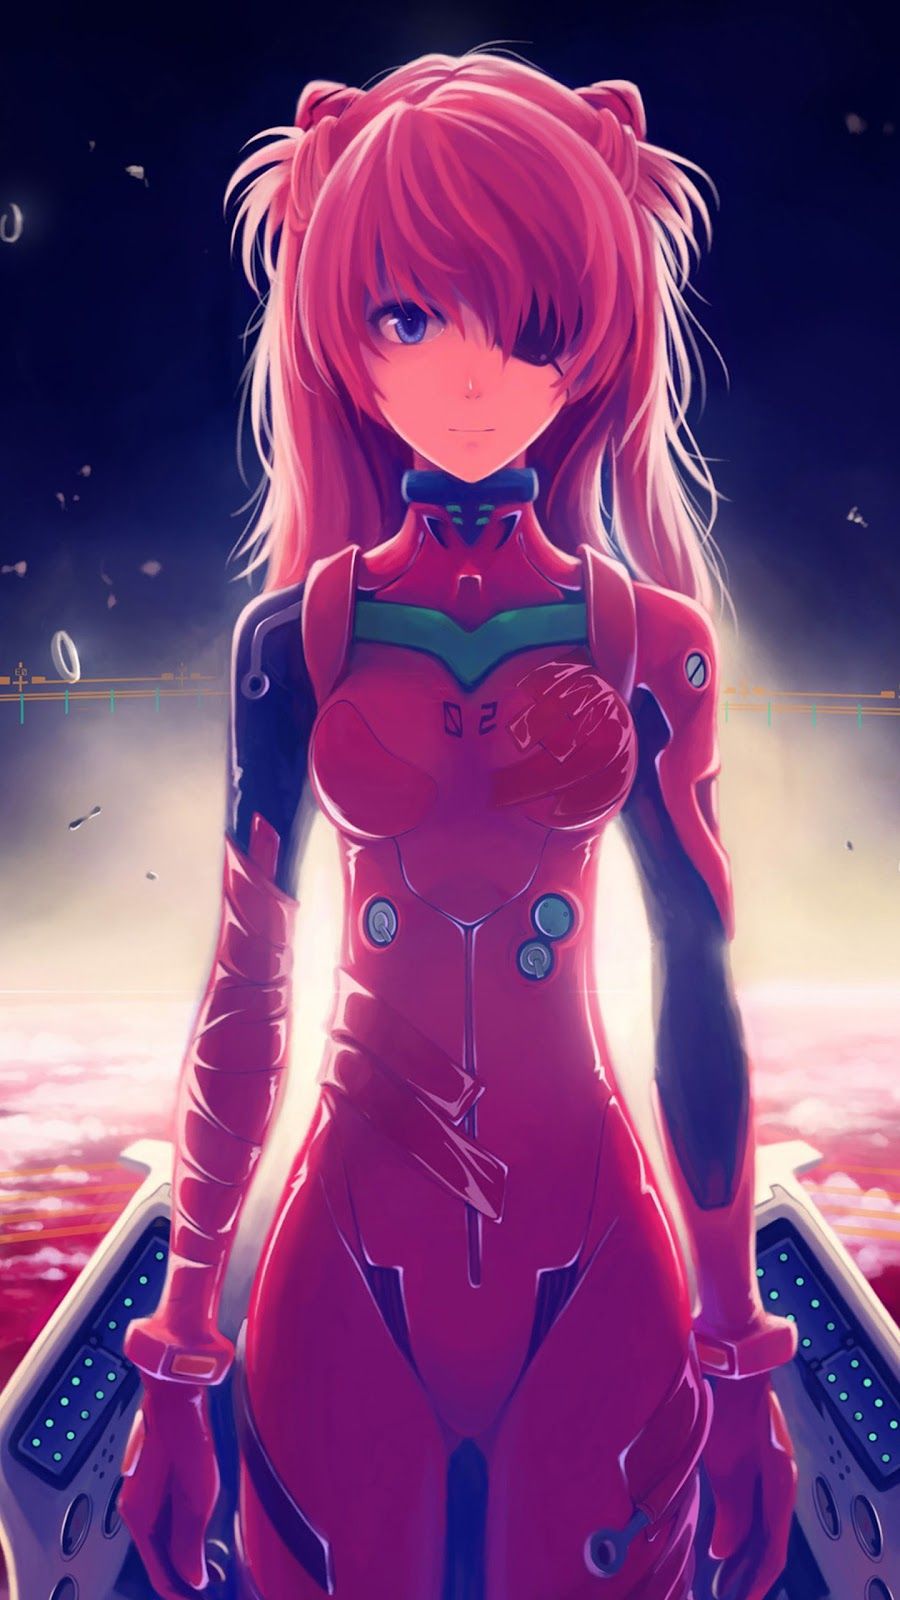 anime girl wallpaper for android DriverLayer Search Engine. Total